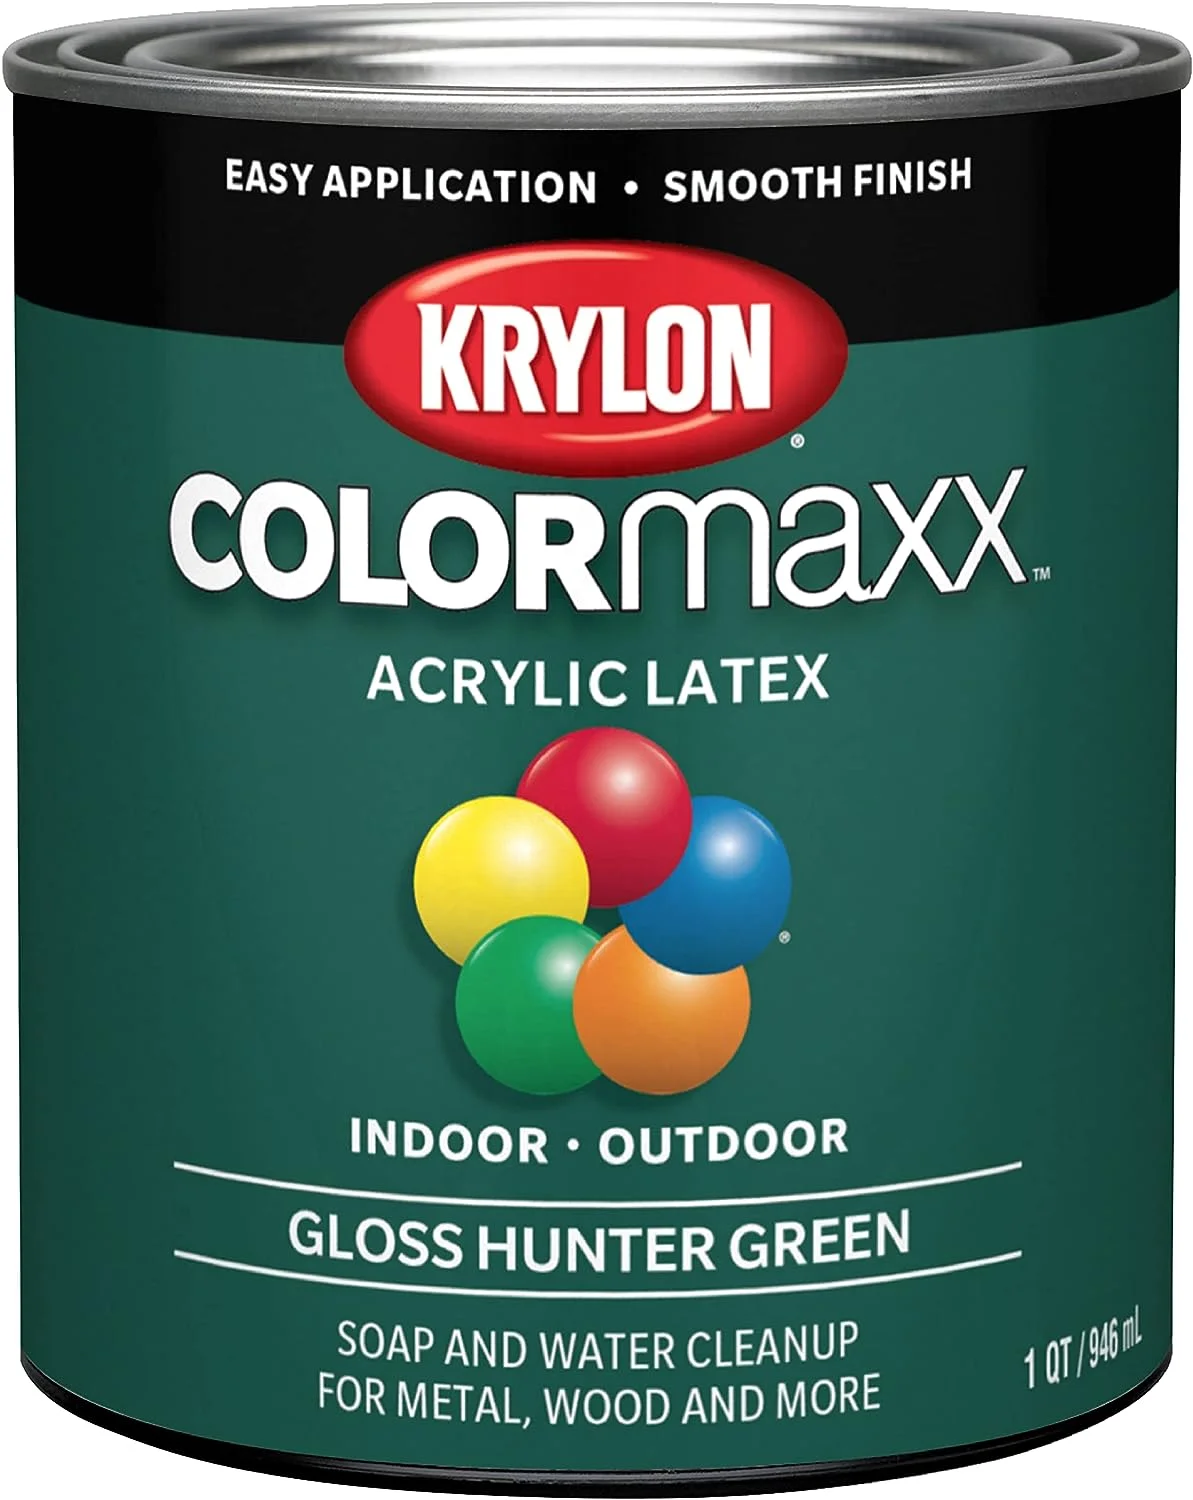 Krylon K05642007 COLORmaxx Acrylic Latex Brush On Paint for Indoor/Outdoor Use, 32 Fl Oz (Pack of 1), Gloss Hunter Green